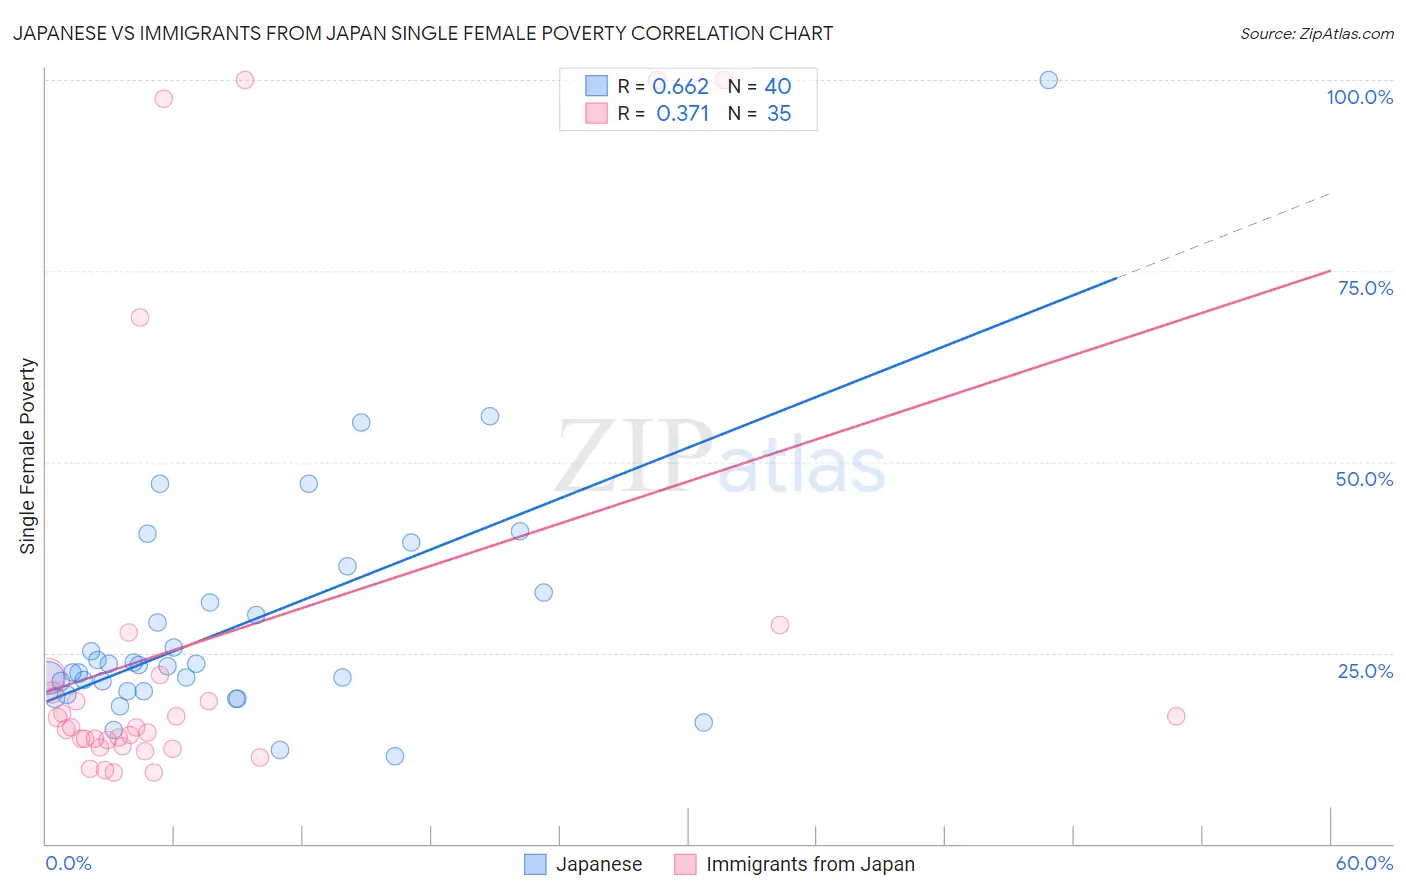 Japanese vs Immigrants from Japan Single Female Poverty